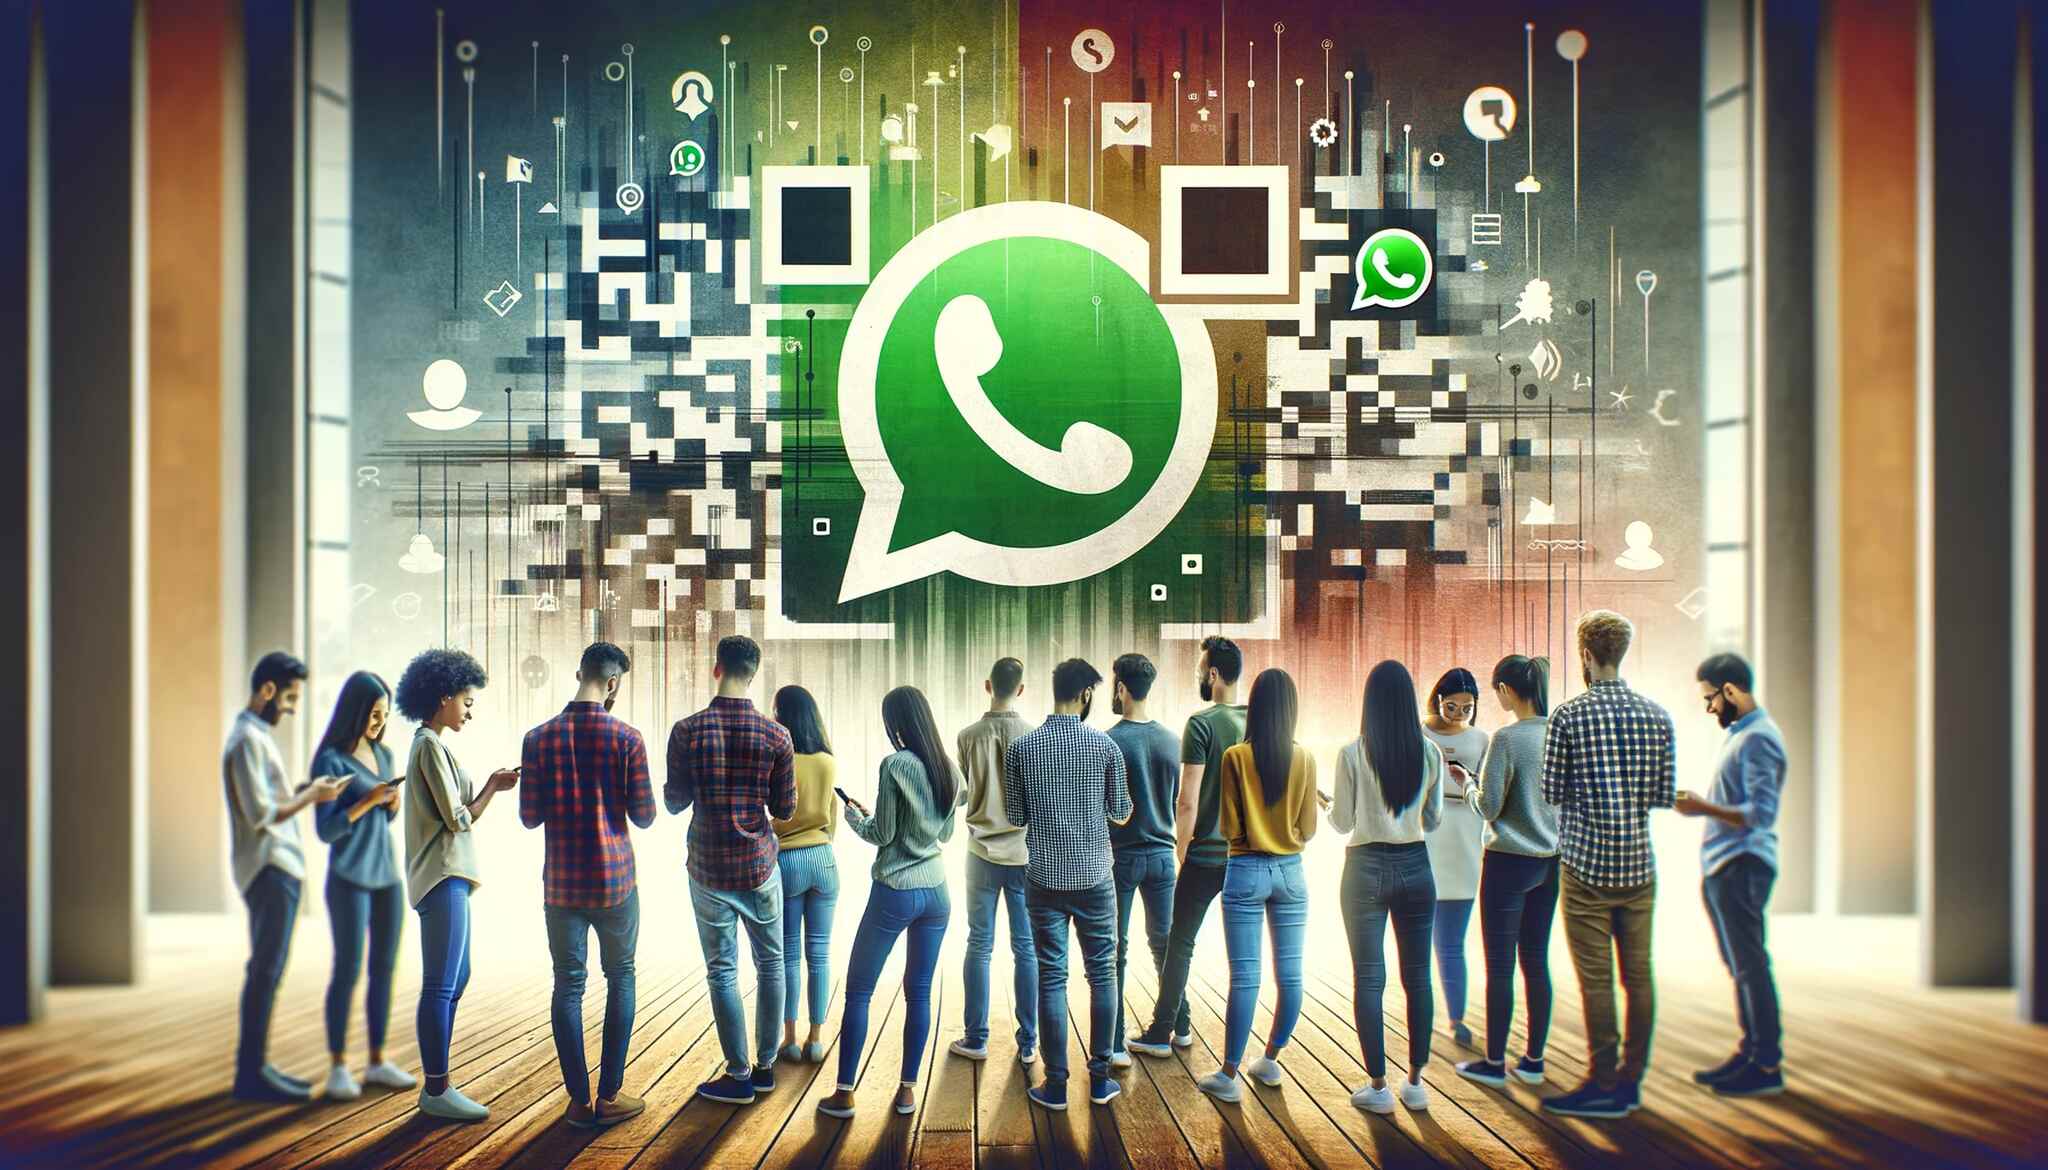  A group of people standing together and scanning a QR code with their smartphones, with a subtle and abstract representation of WhatsApp logo